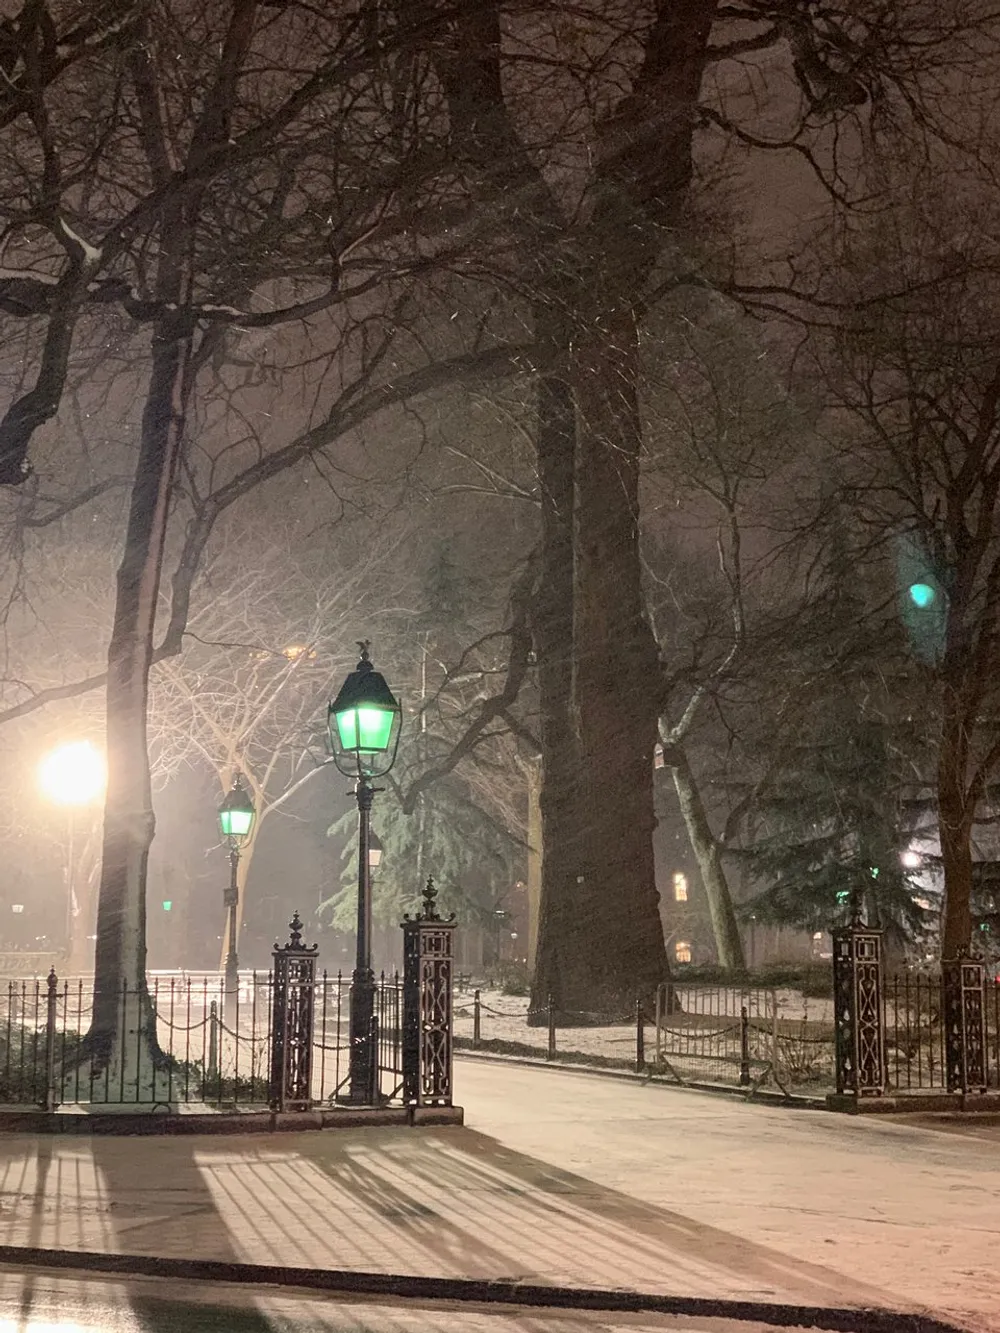 A snow-dusted park at night is illuminated by the warm glow of green-tinted lampposts casting long shadows through the gate and across the ground with trees looming in the backdrop